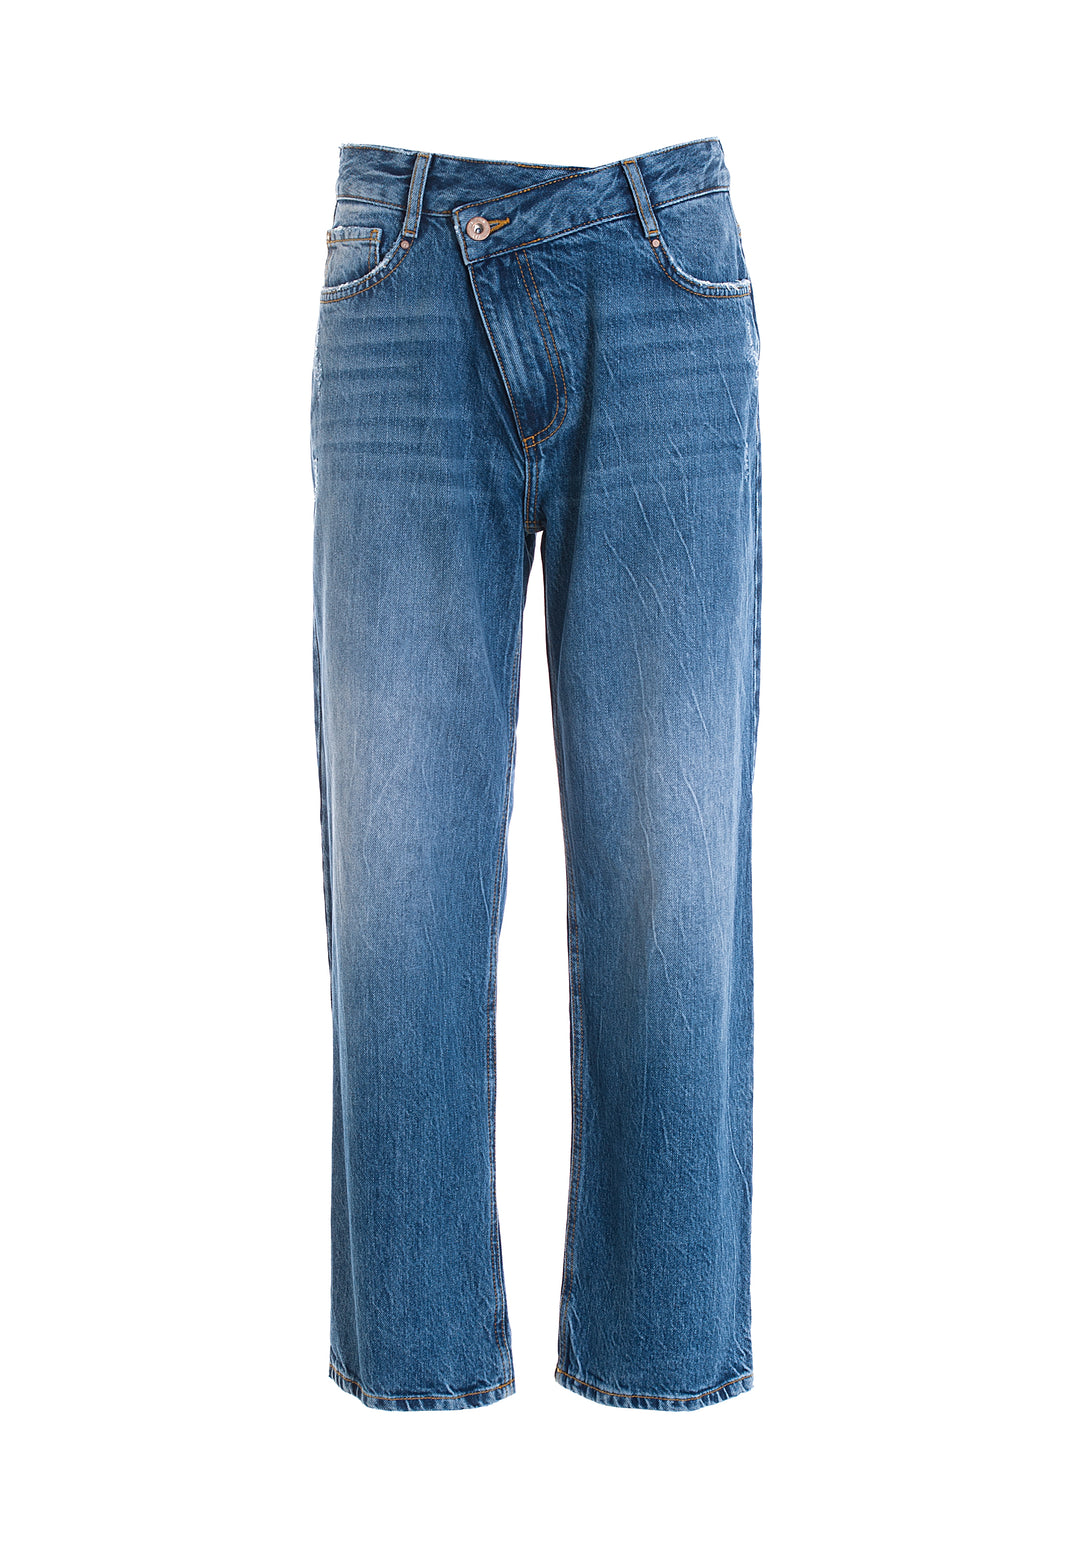 Jeans wide leg cropped made in denim with middle wash